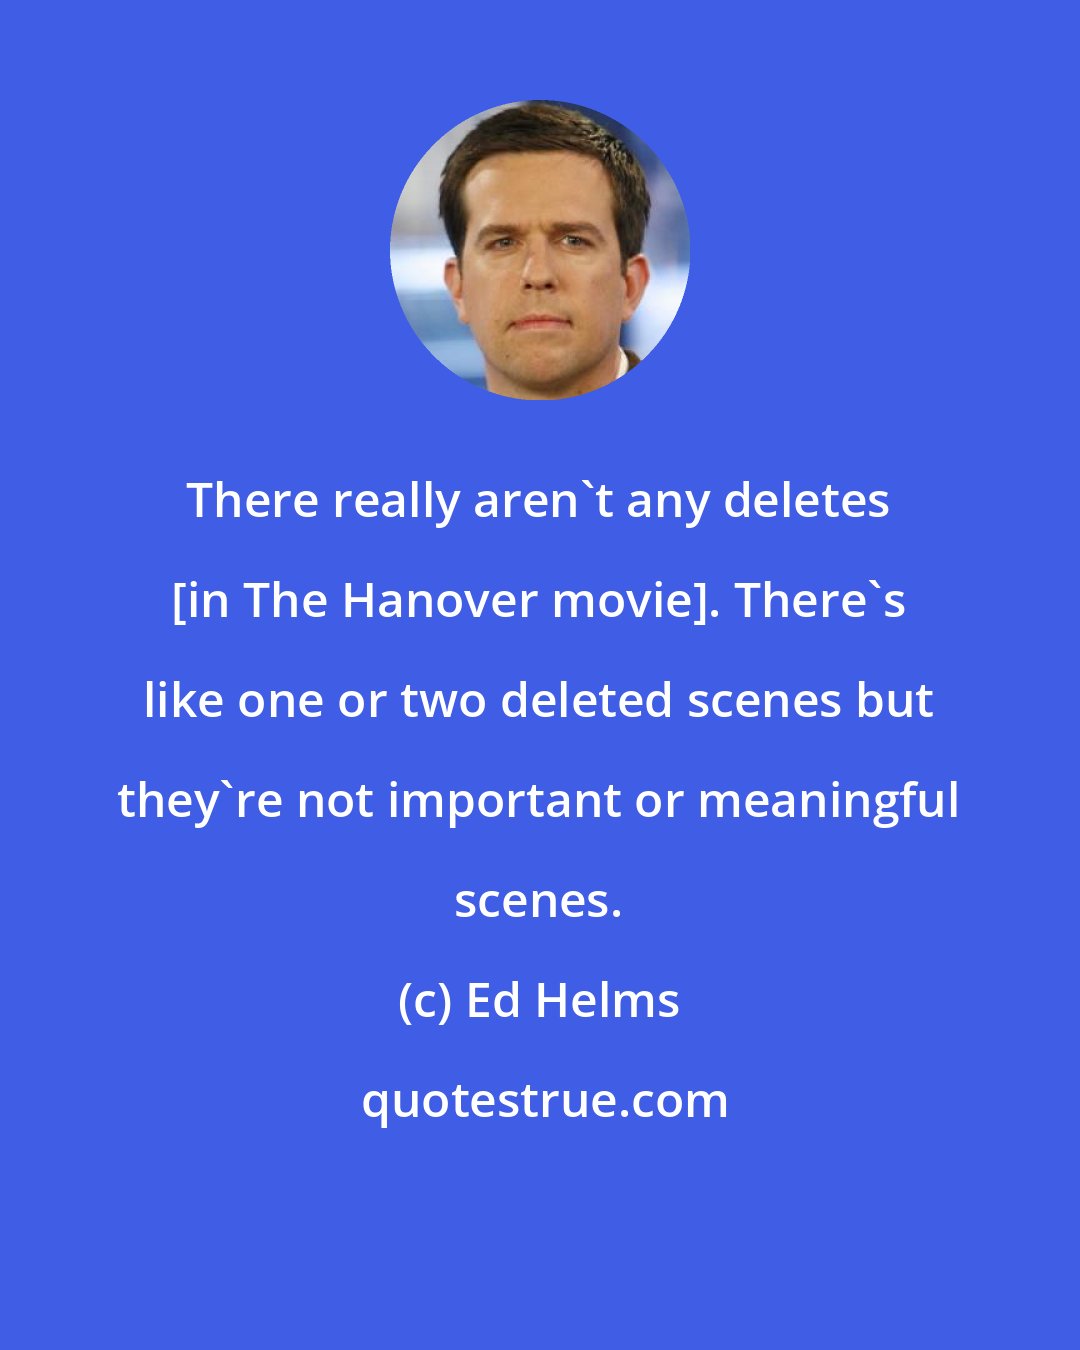 Ed Helms: There really aren't any deletes [in The Hanover movie]. There's like one or two deleted scenes but they're not important or meaningful scenes.